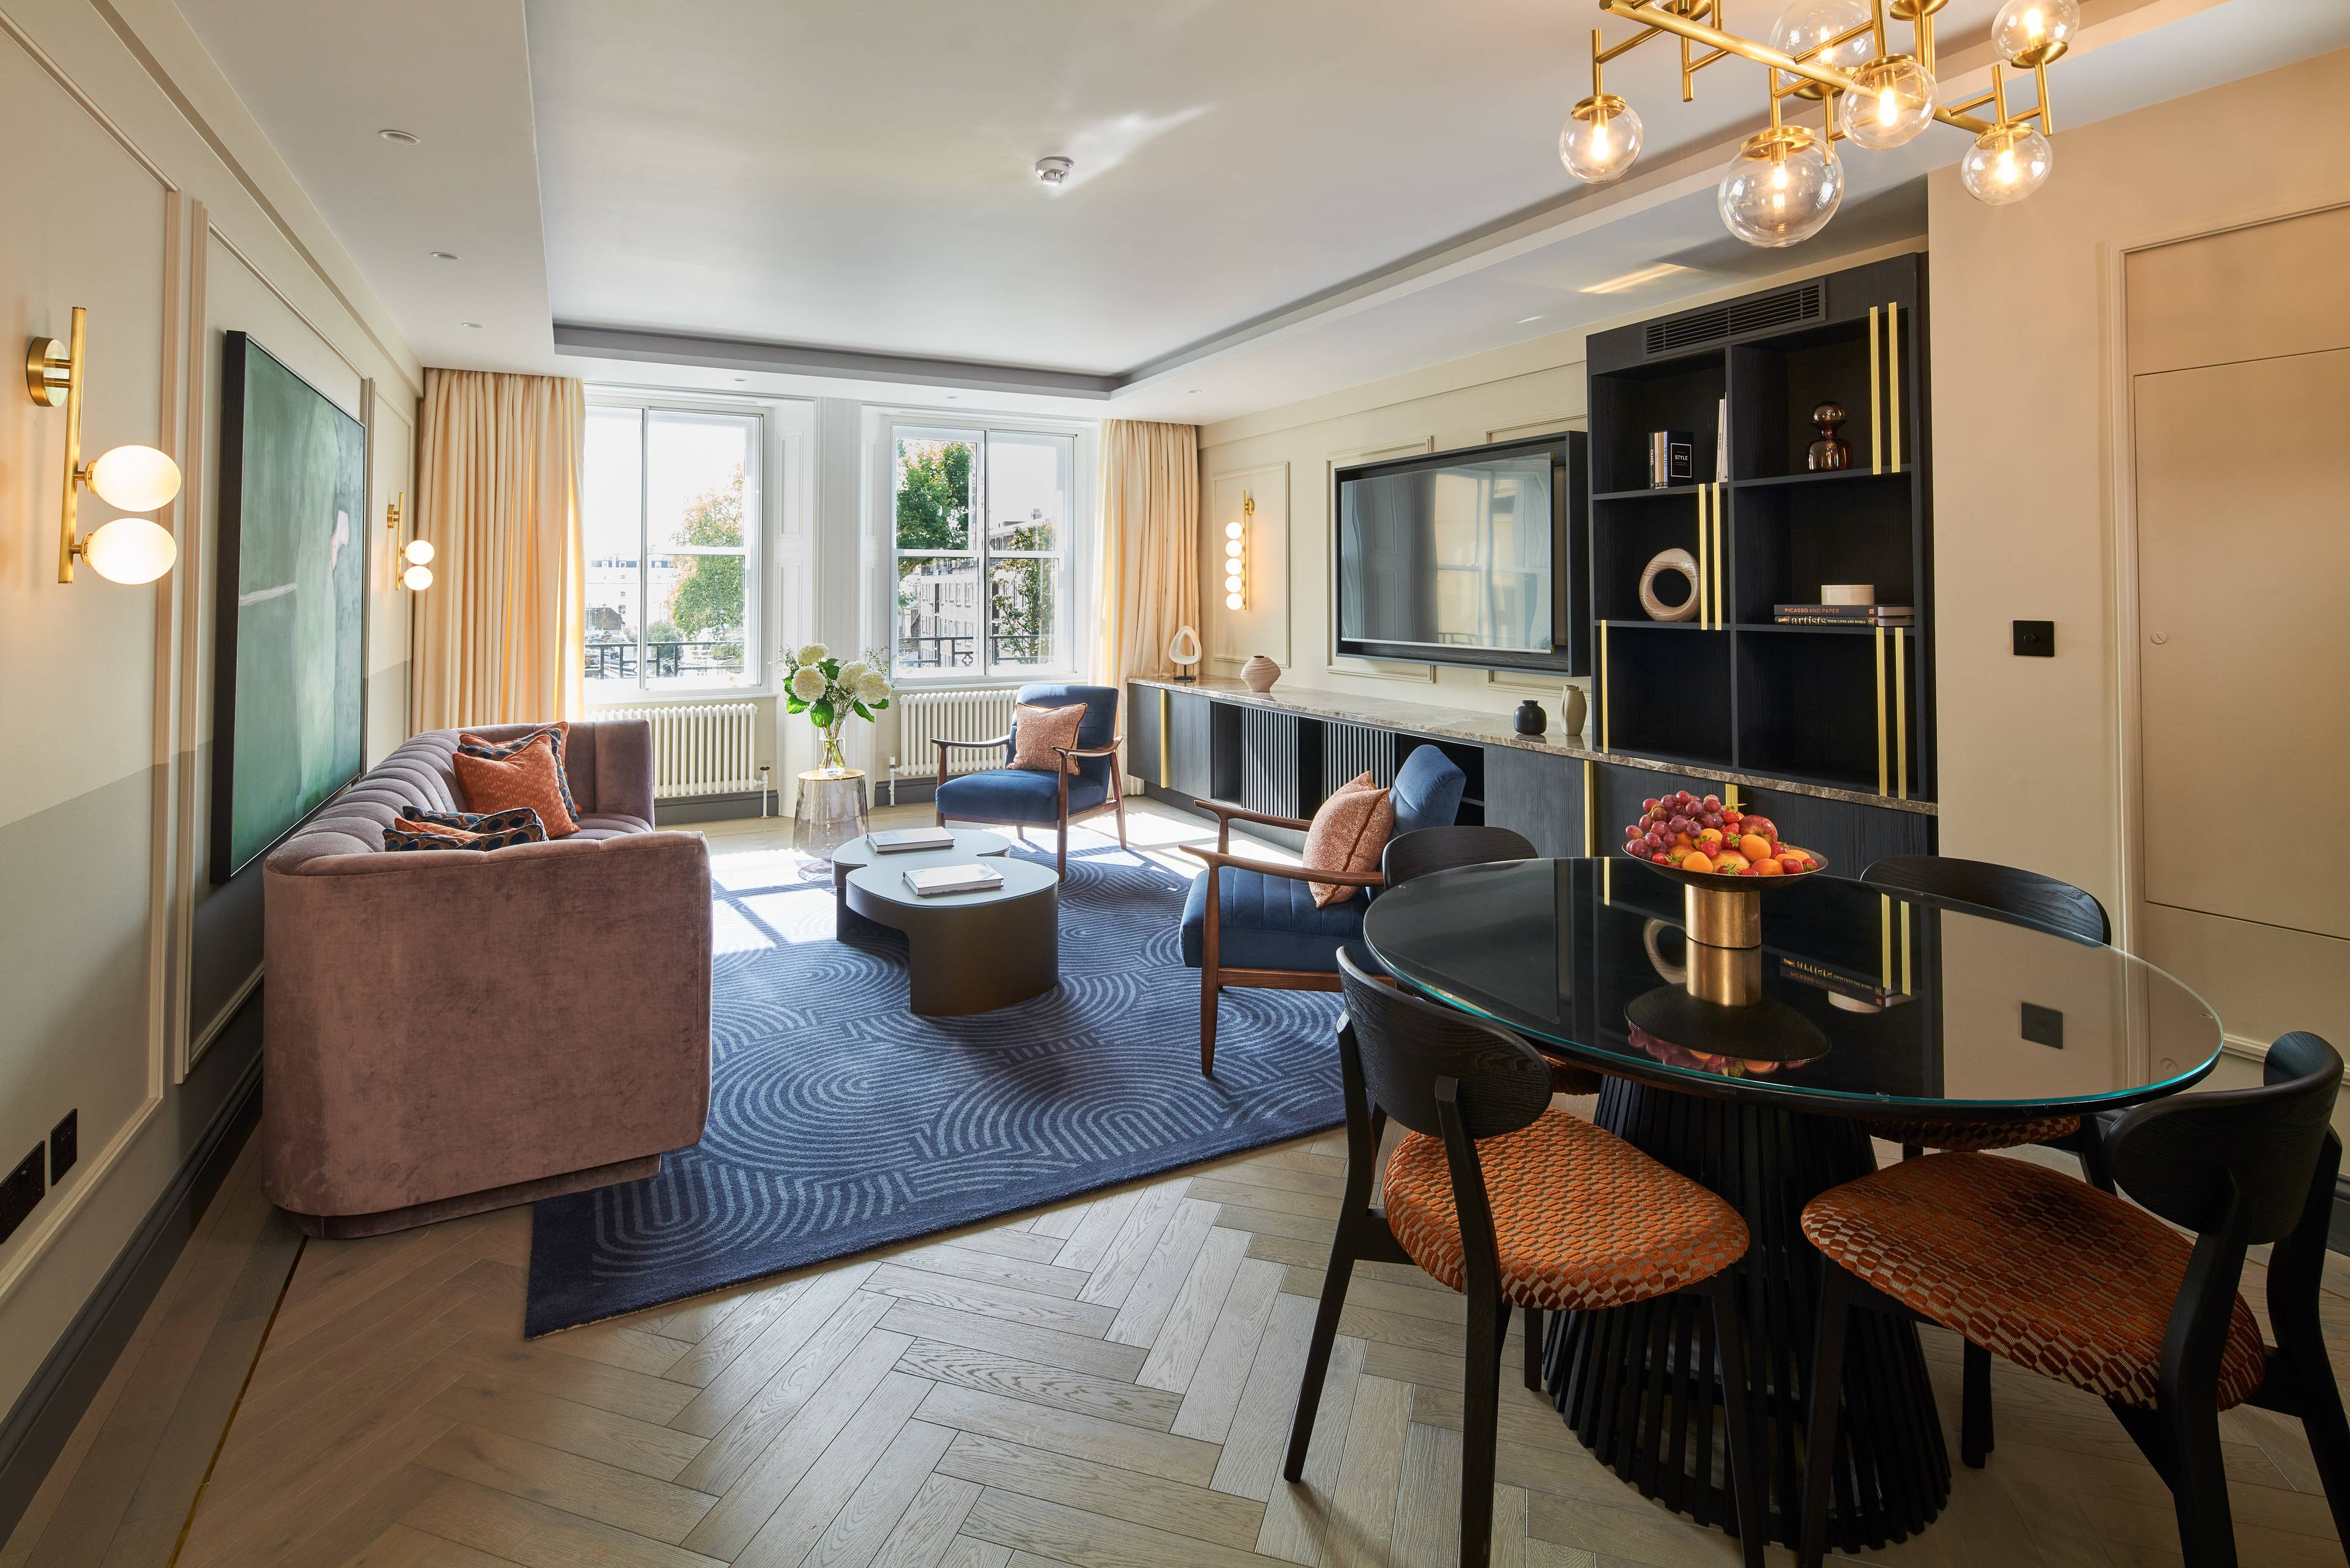 Deluxe Second-Floor Two-Bedroom Serviced Apartment in a Palatial Kensington Residence